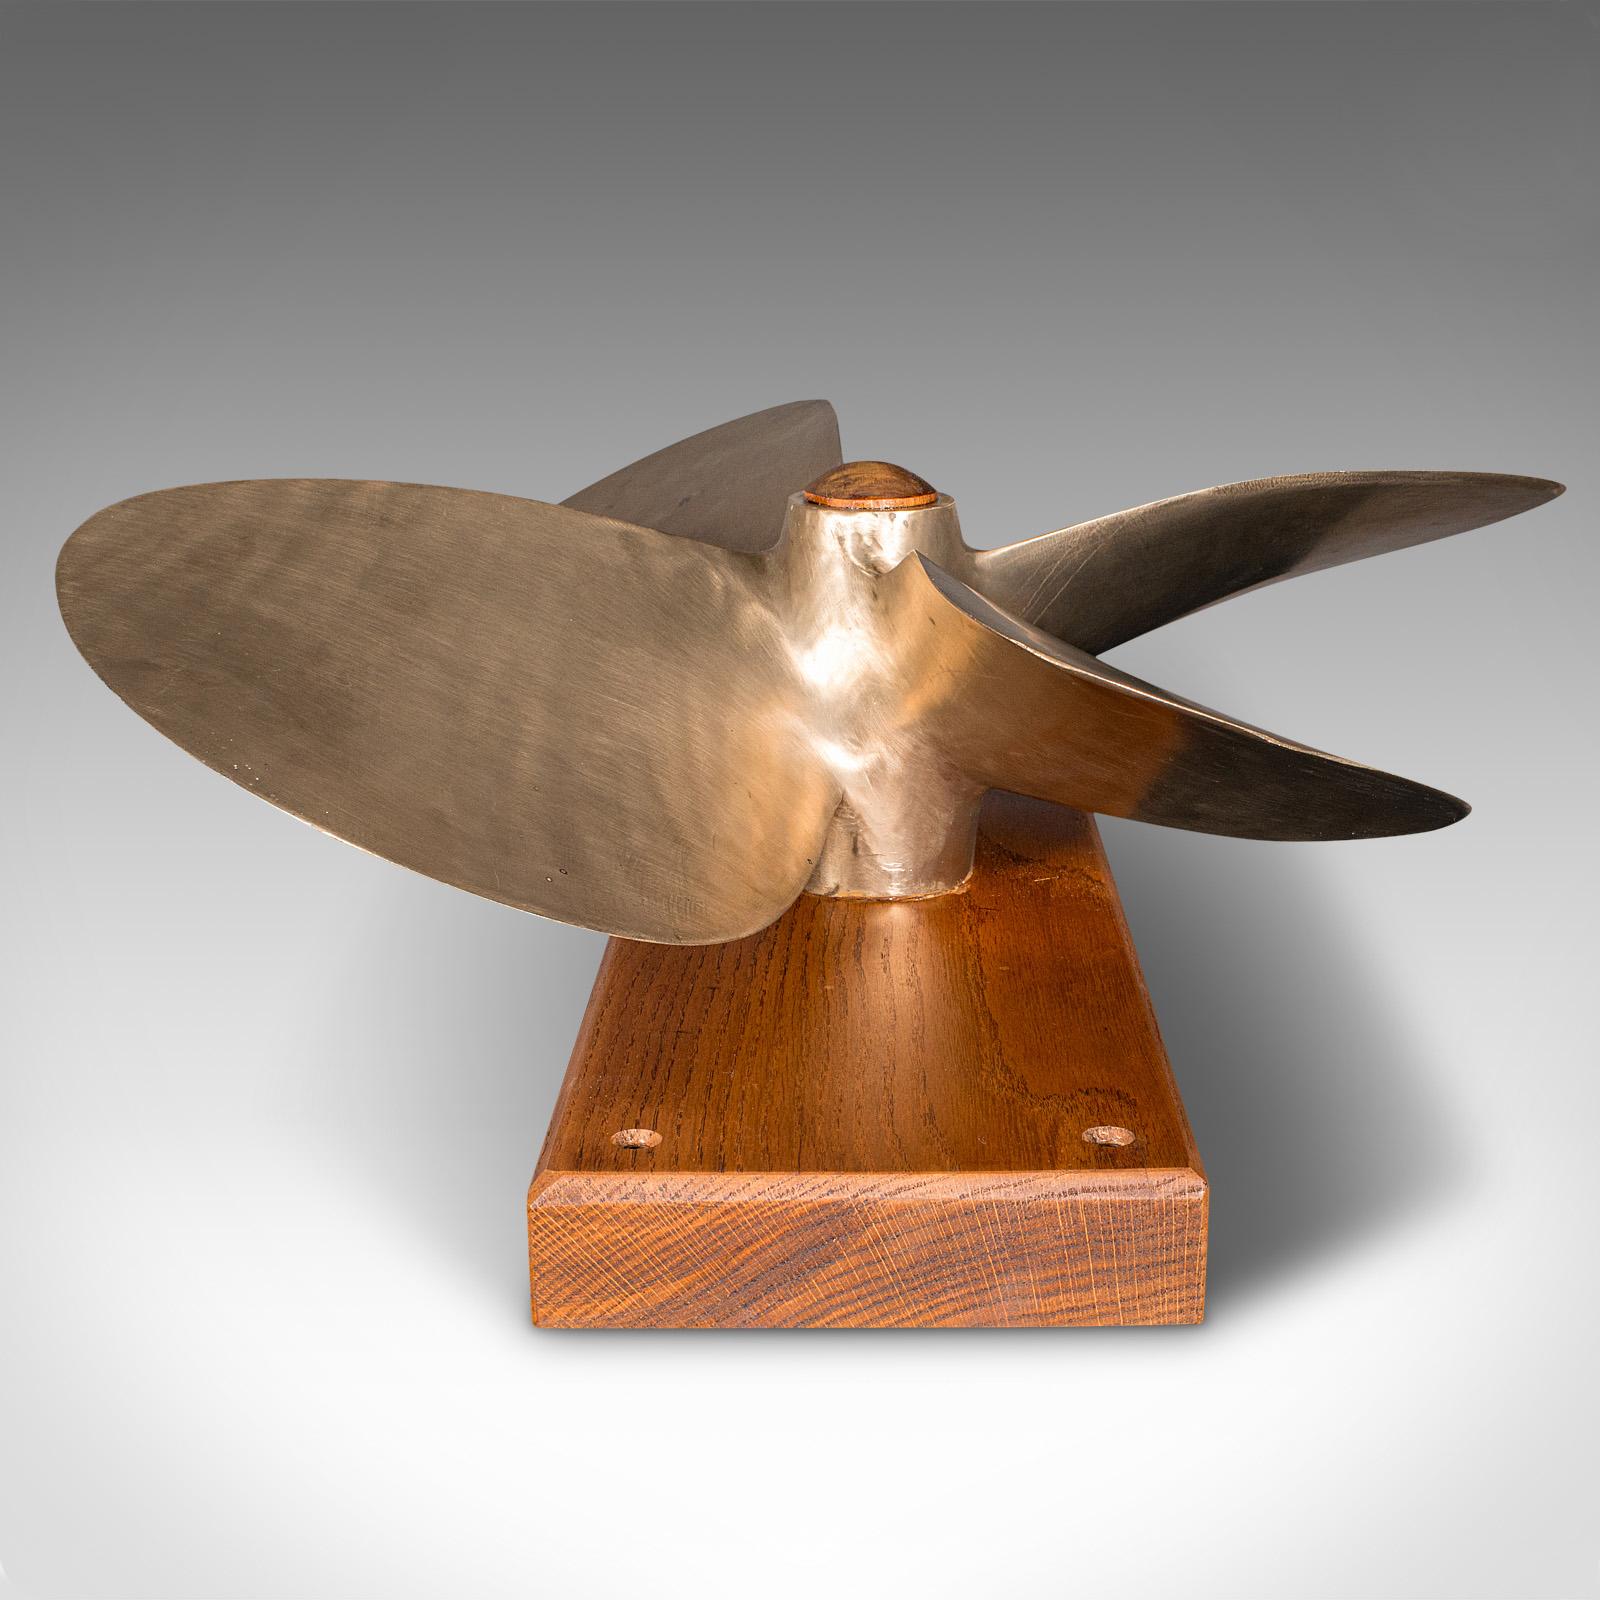 Large Vintage Ship Propeller Display, English Bronze, Oak, Maritime, Mid Century In Good Condition For Sale In Hele, Devon, GB